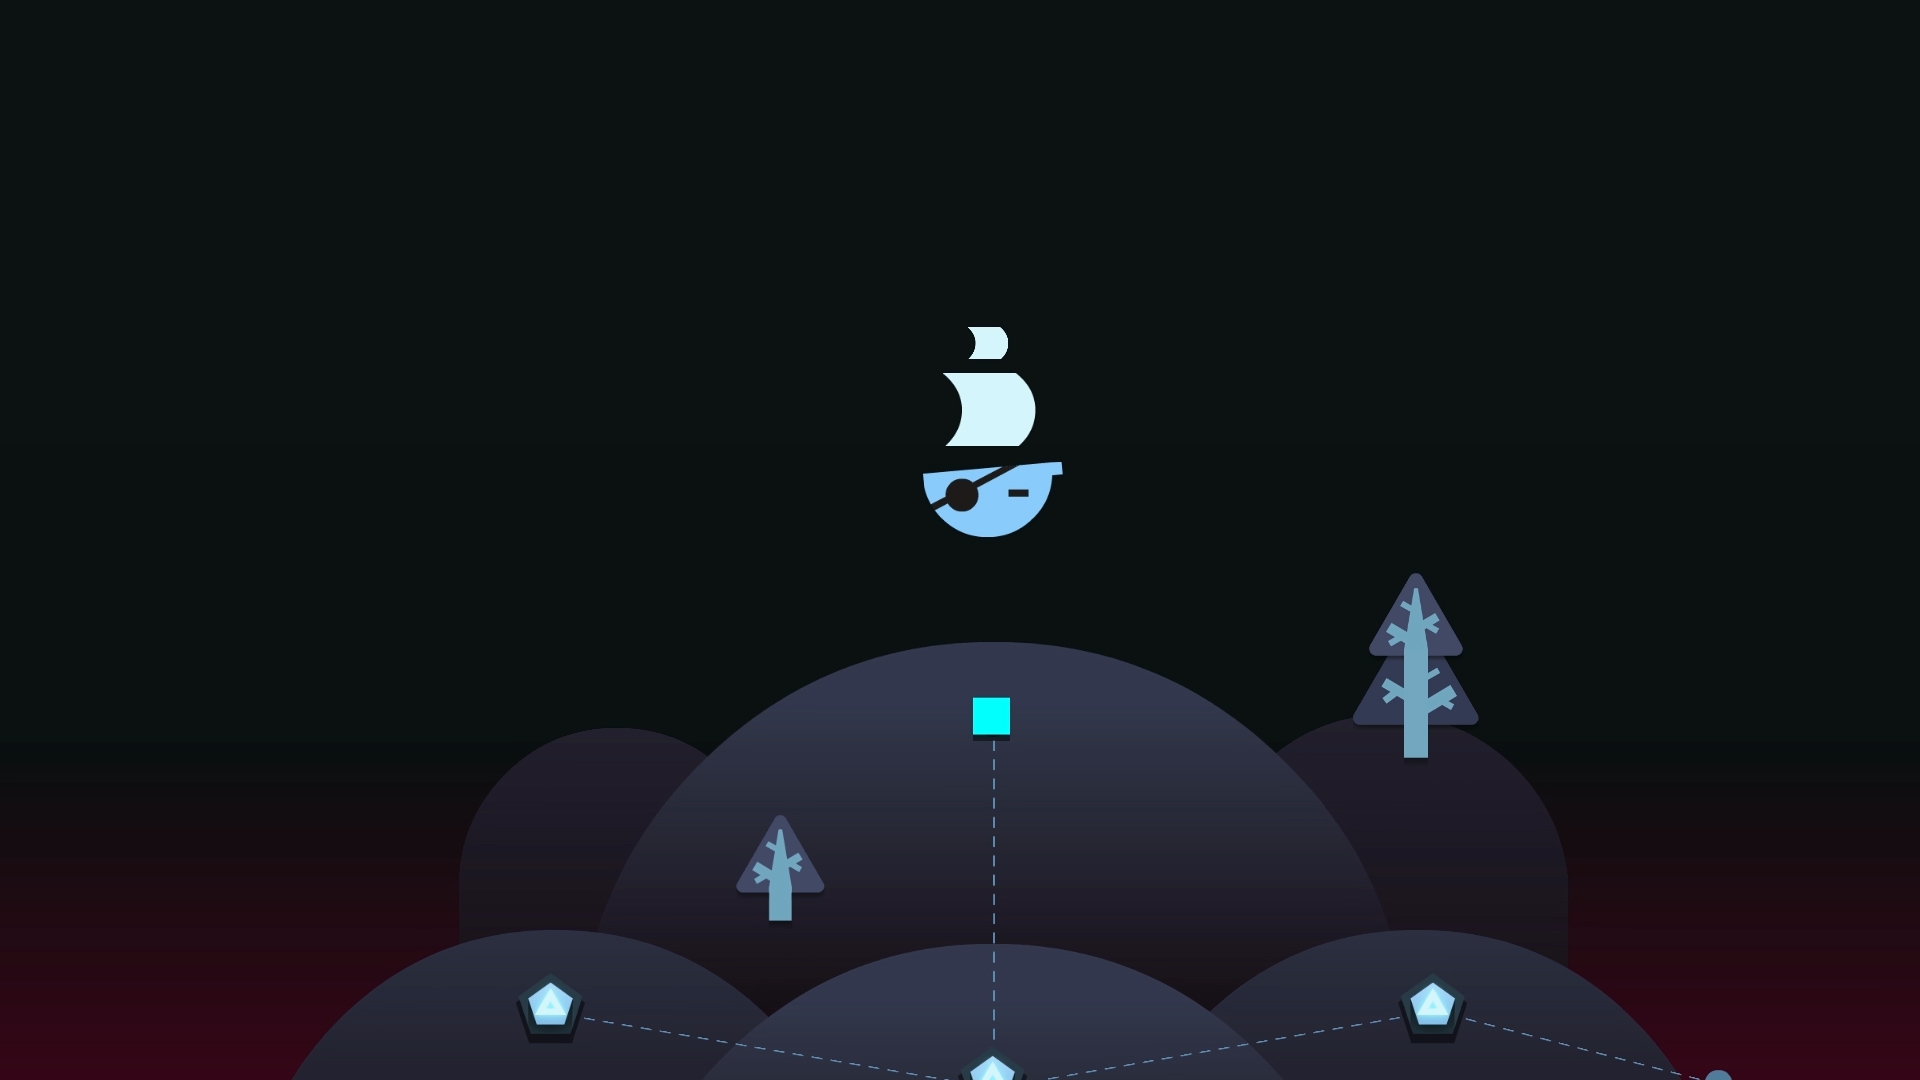 just shapes and beats level editor pre alpha download